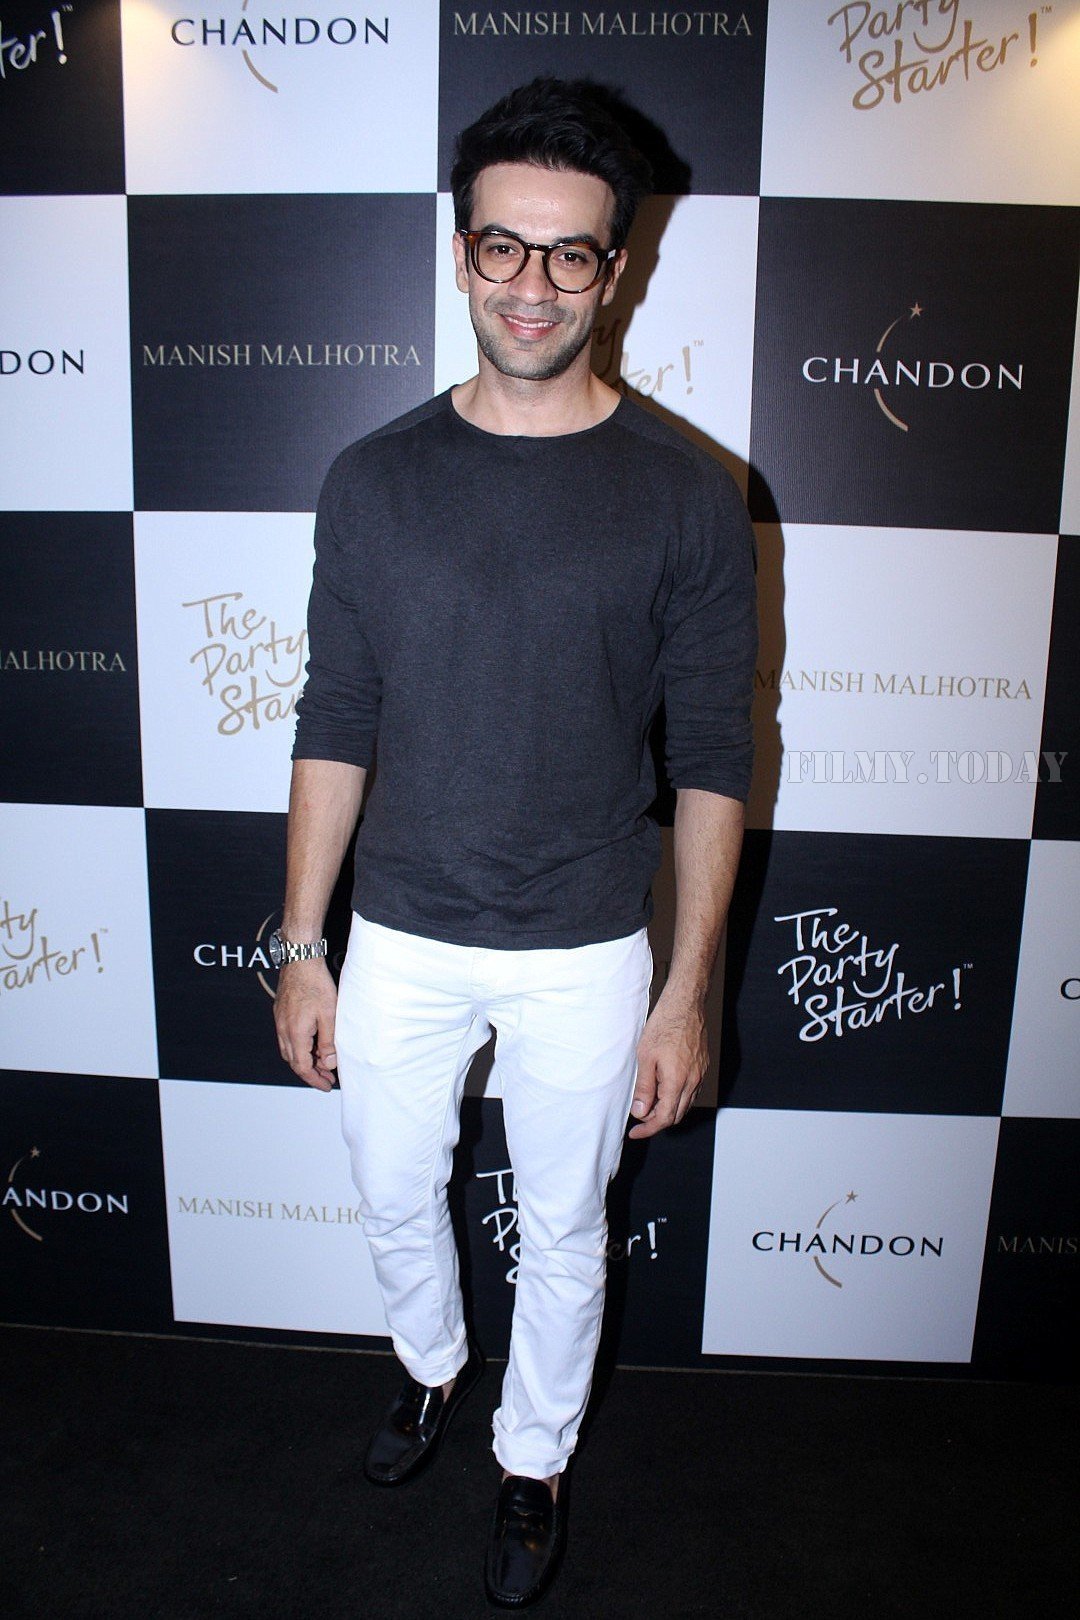 In Pics: Launch Of Manish Malhotra X Chandon Limited Edition End Of Year 2017 Bottles | Picture 1534979